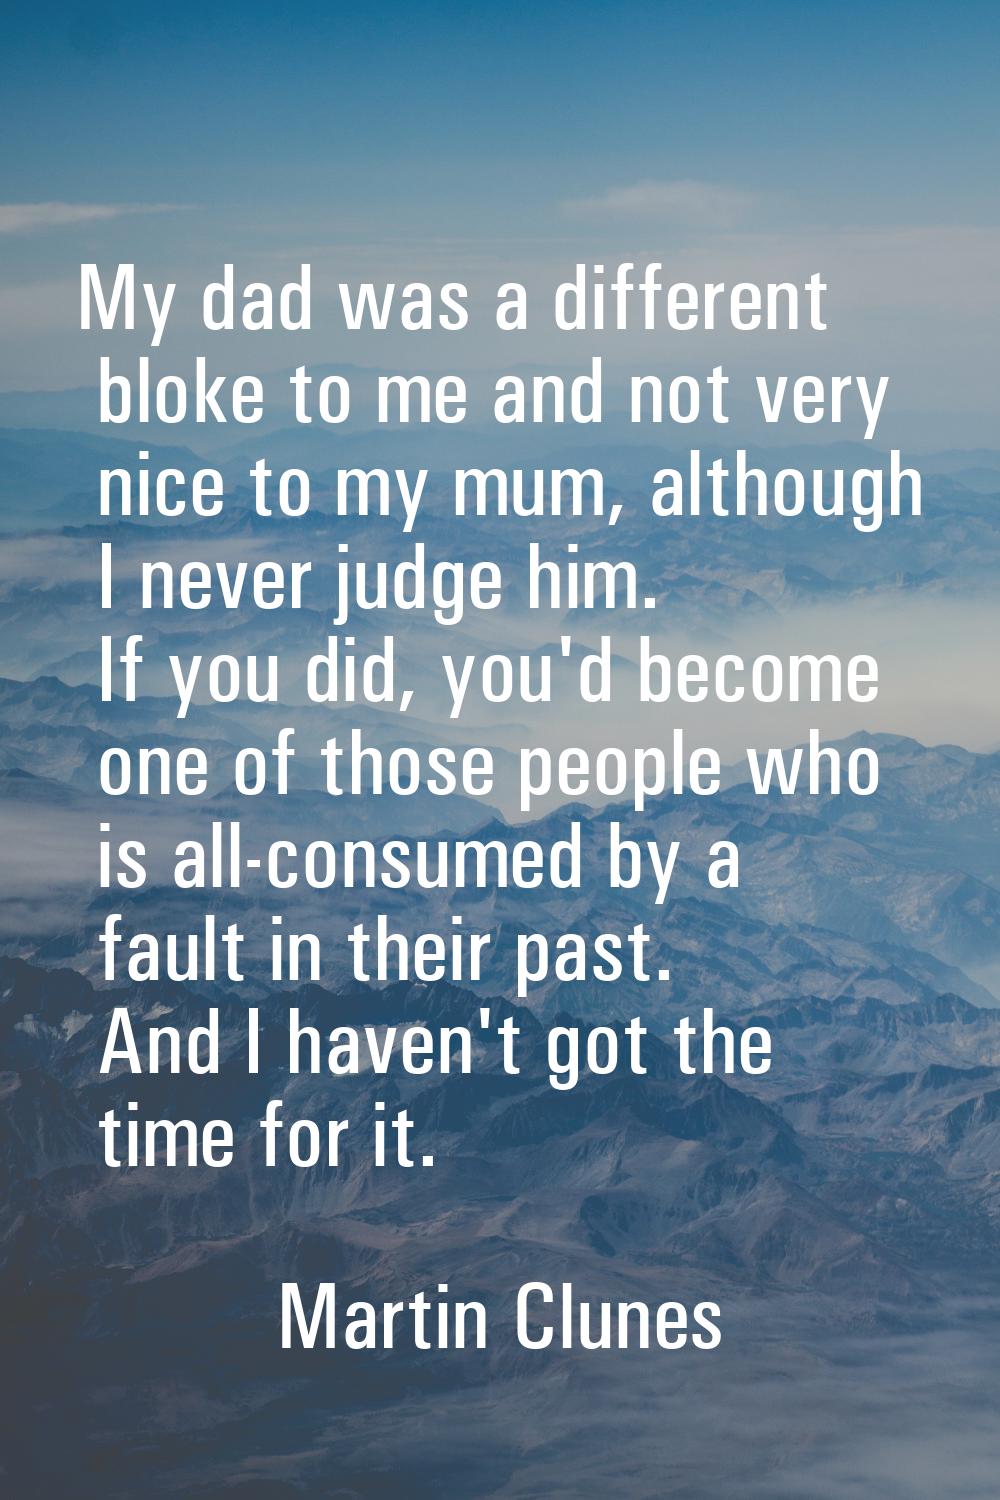 My dad was a different bloke to me and not very nice to my mum, although I never judge him. If you 